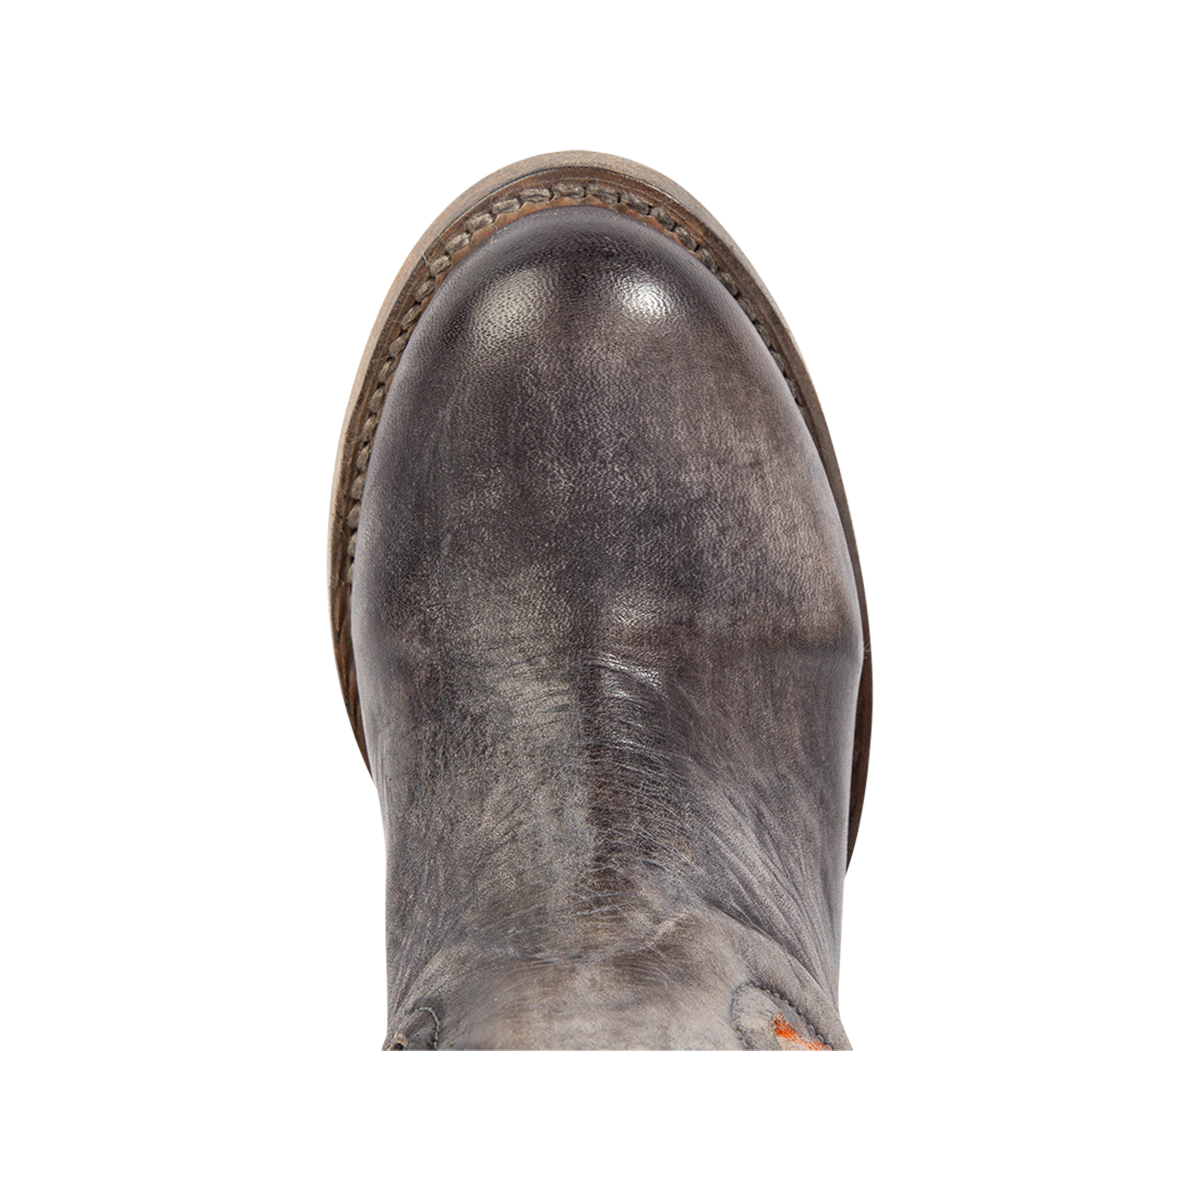 Top view showing a rounded toe and Goodyear welt on FREEBIRD women's Serape stone leather knee high boot